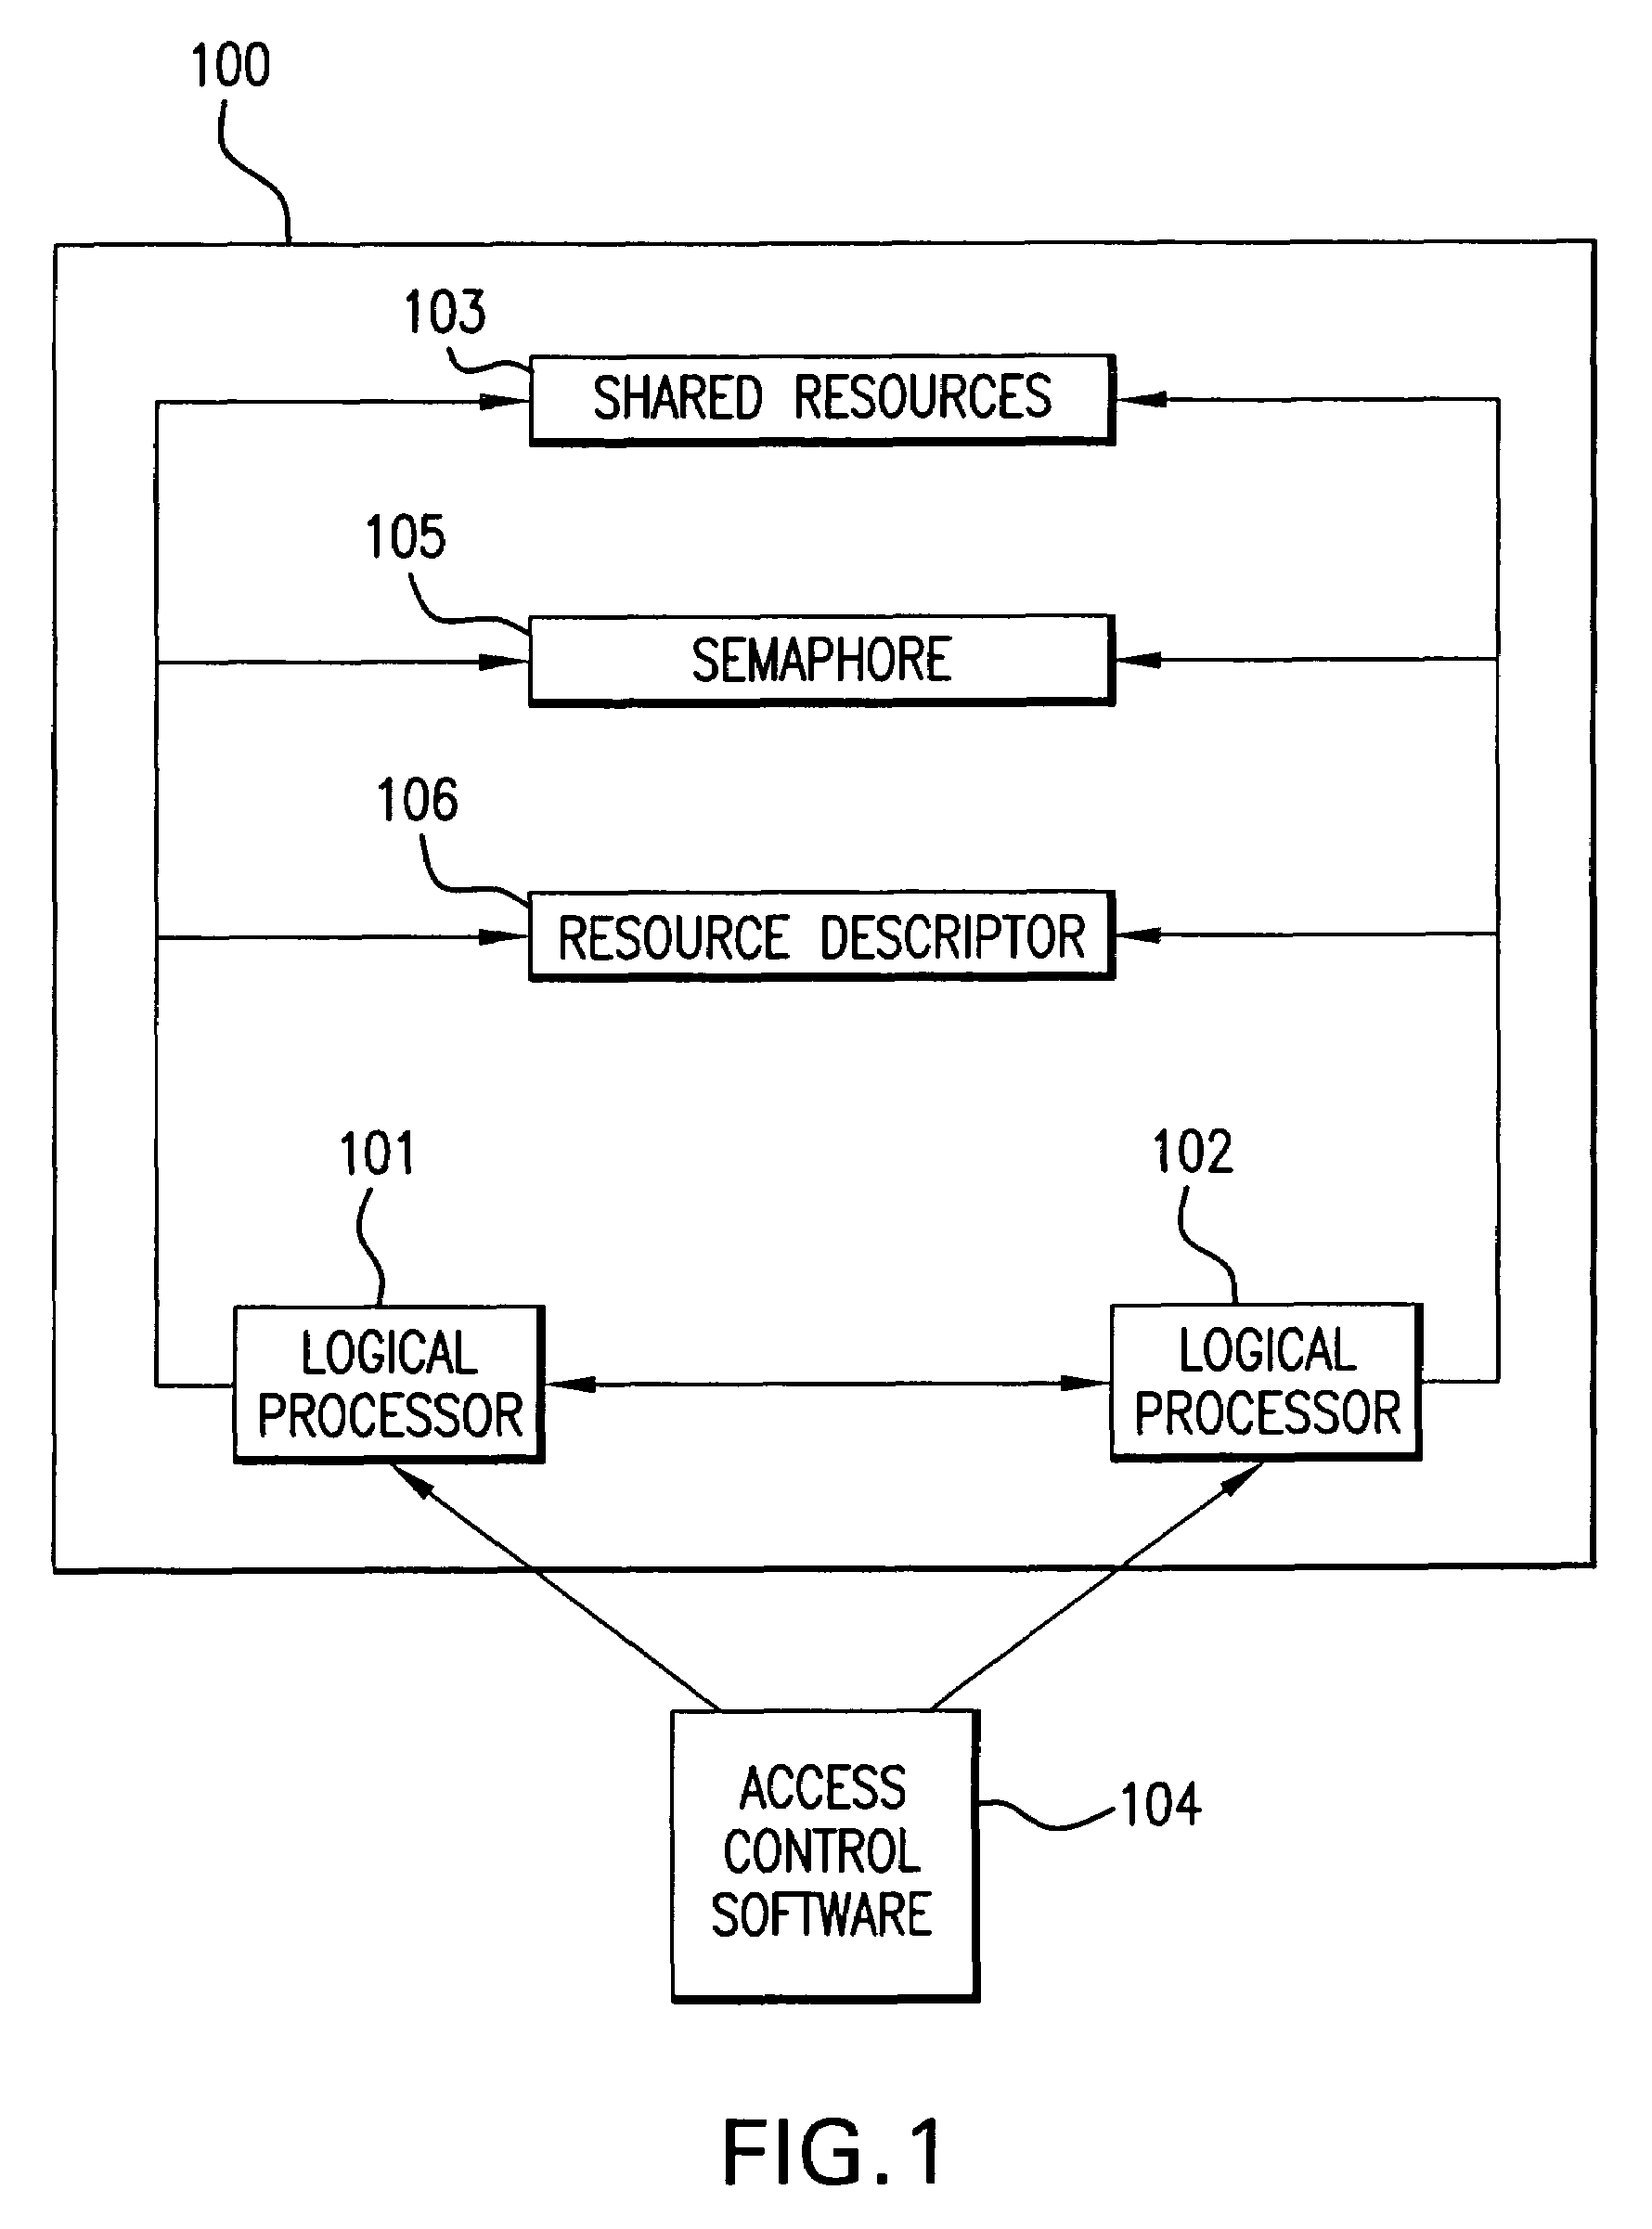 Method and apparatus for controlling access to shared resources in an environment with multiple logical processors